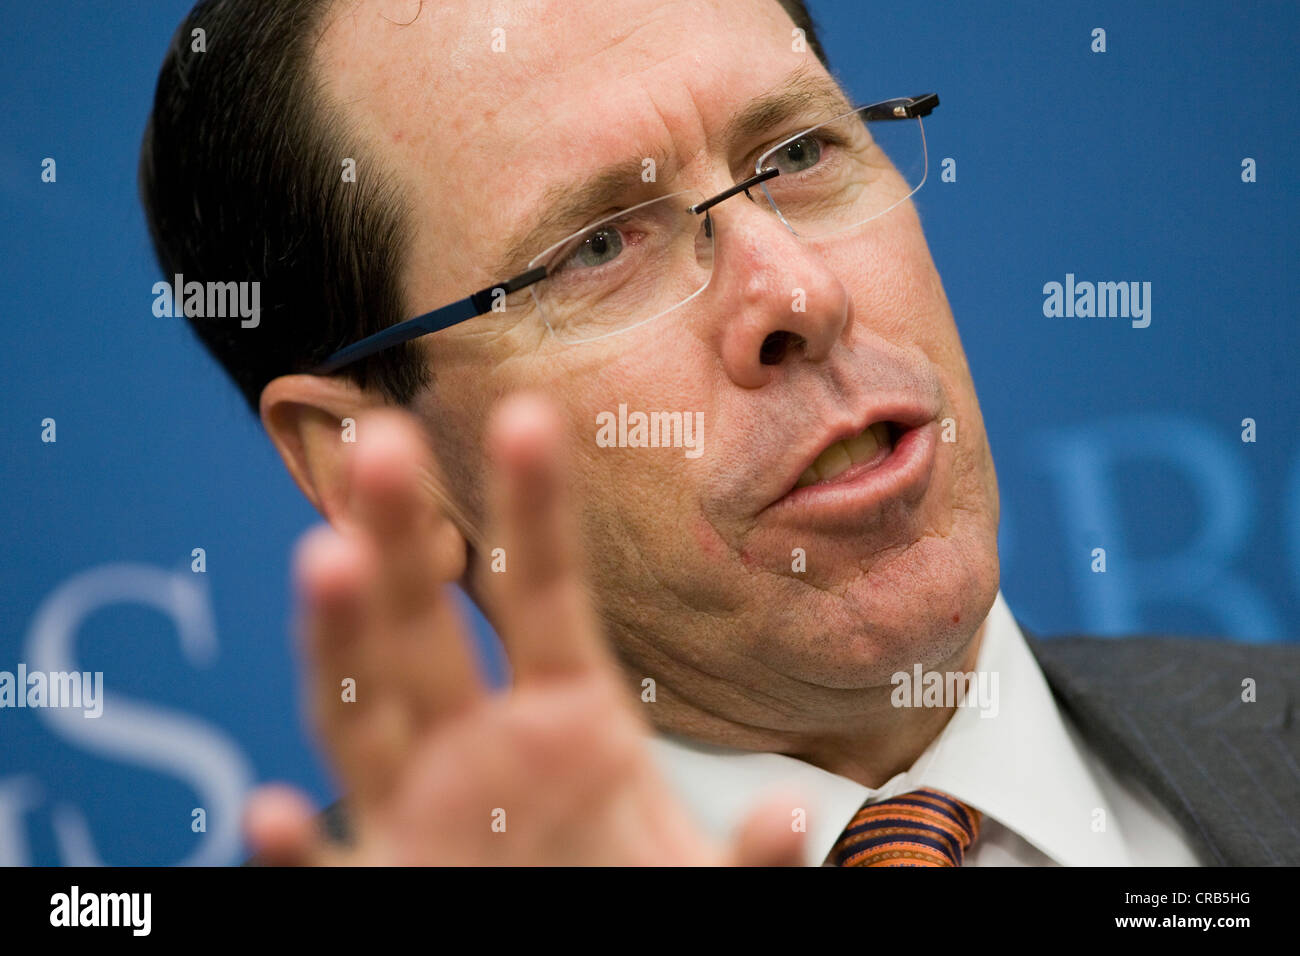 Randall Stephenson, Chairman and CEO of AT&T.  Stock Photo